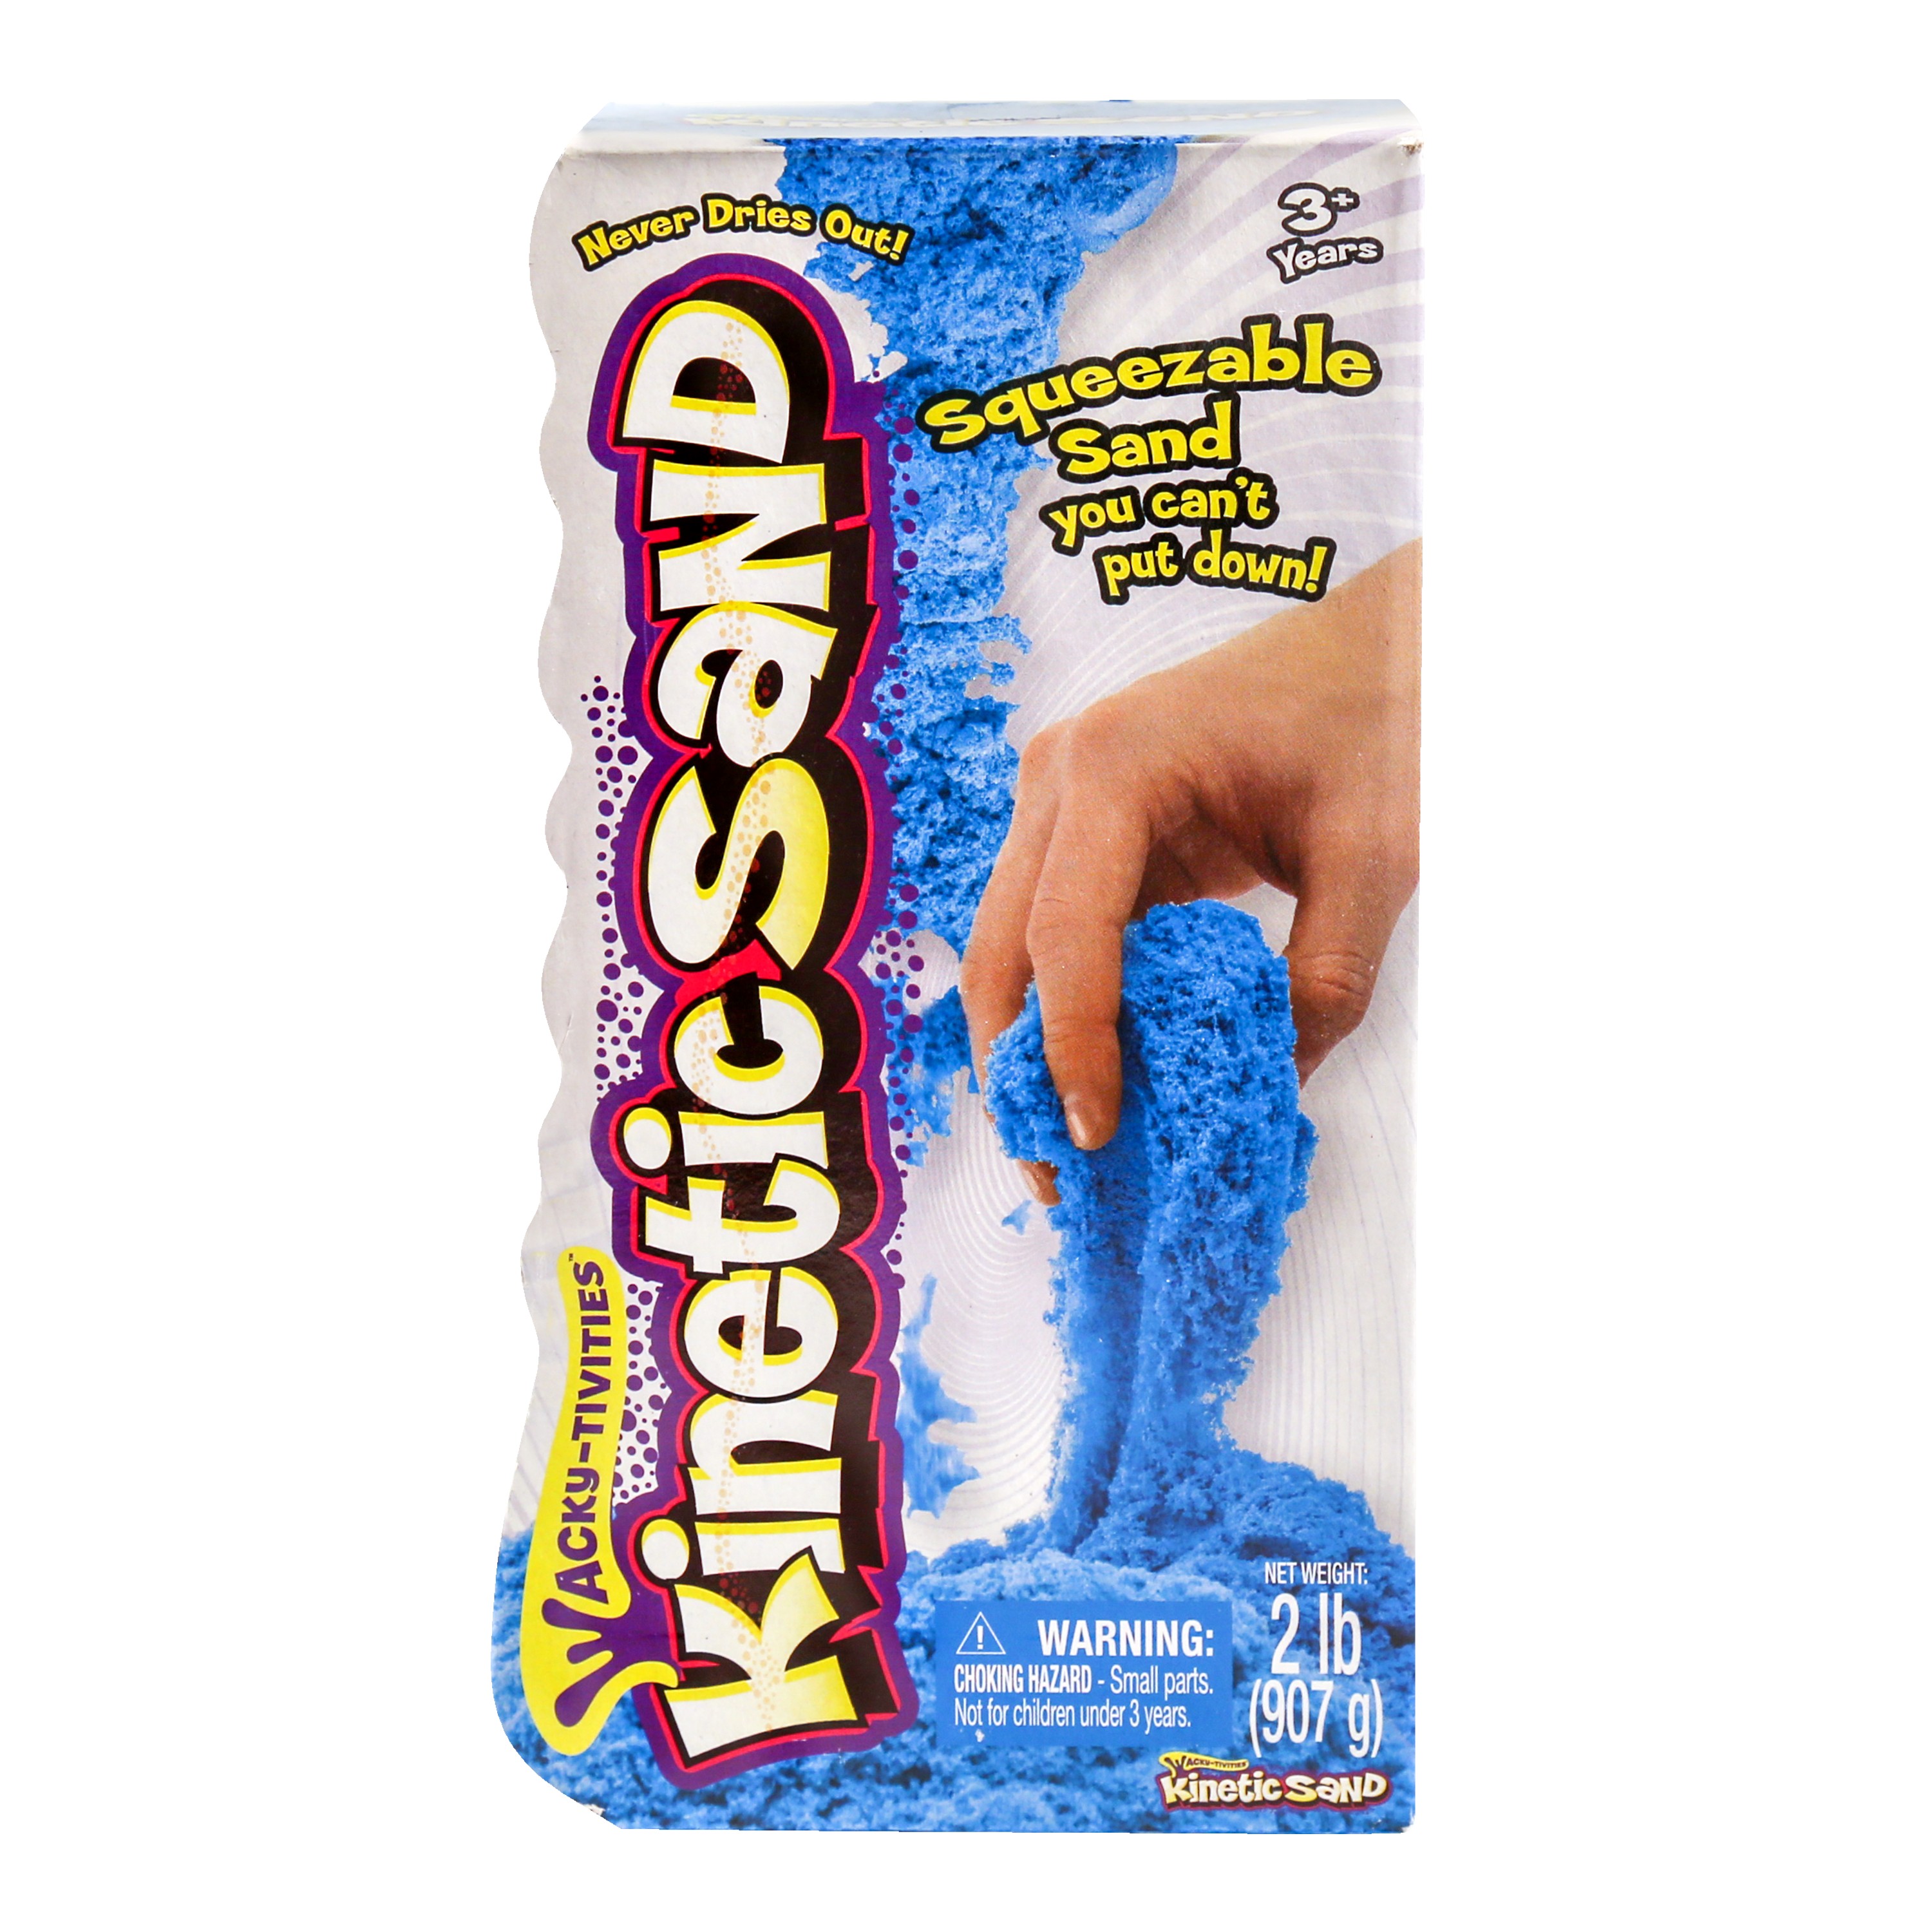 Stimming with my new kinetic sand tonight : r/autism